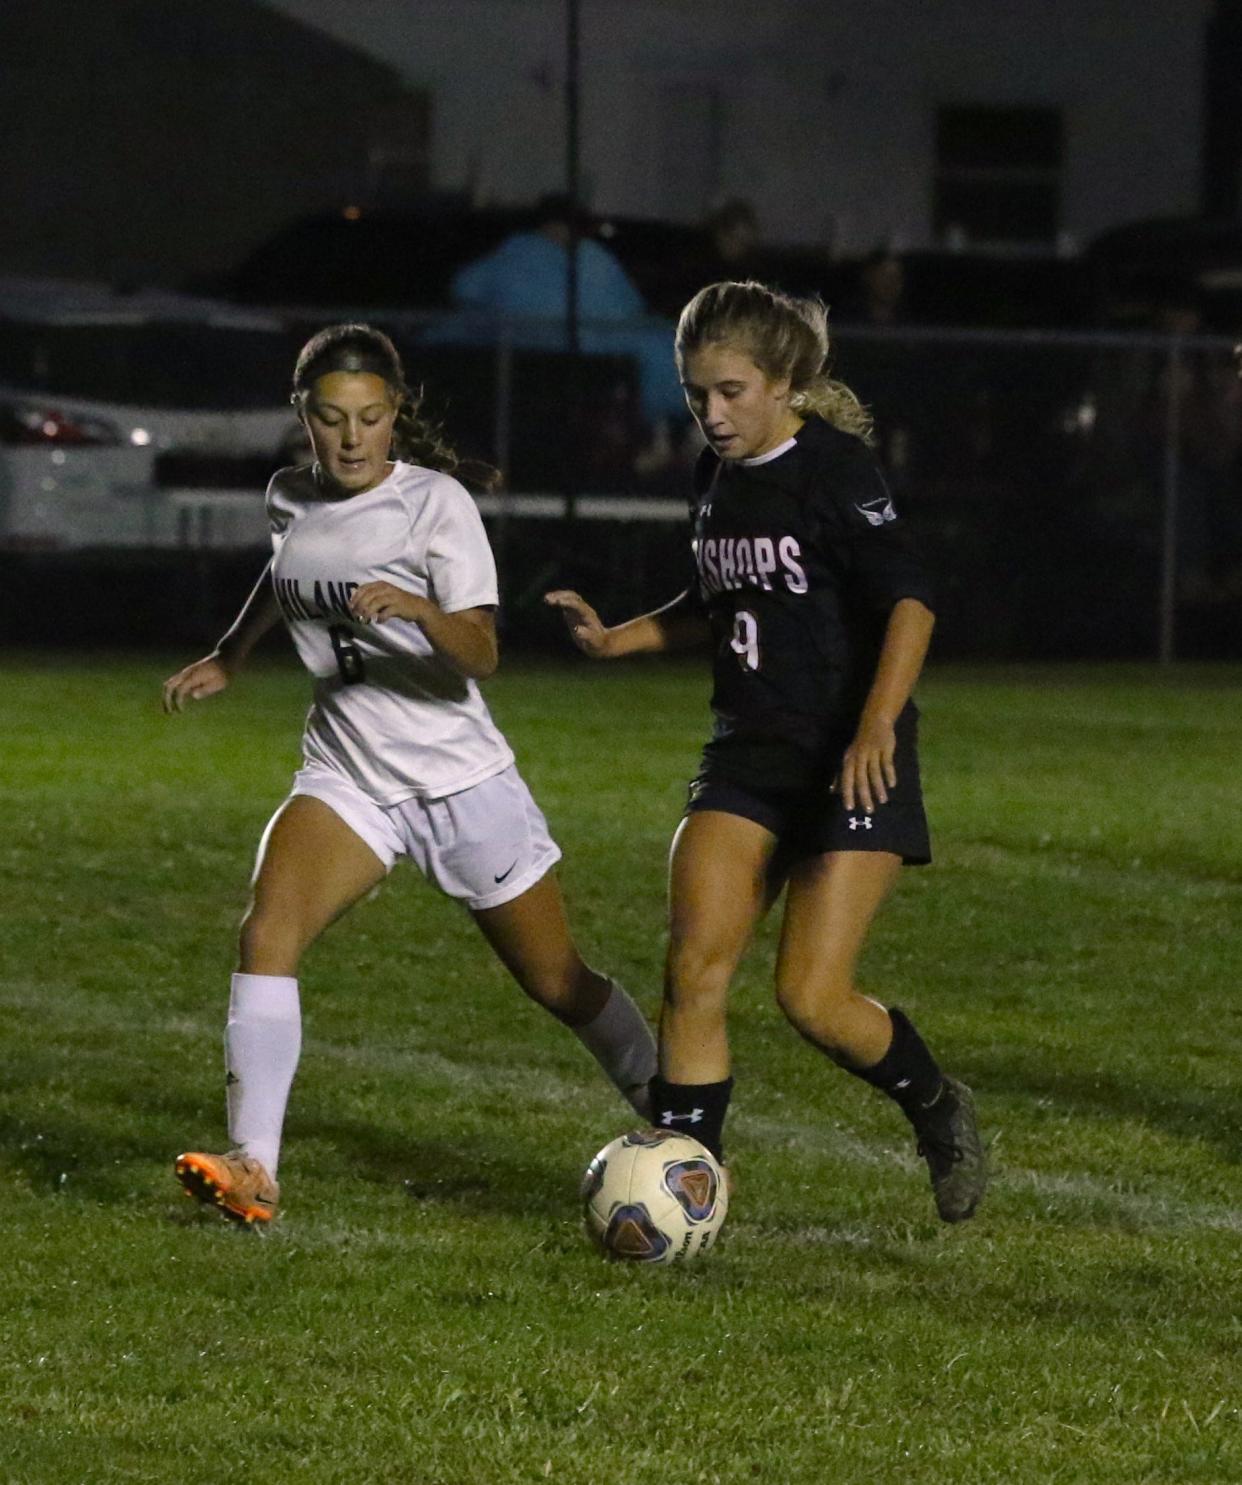 Rosecrans' Sydnee Maxwell is guarded by Hiland's Miah Miller during the Division III sectional match. Maxwell was named the East District Division III Girls Player of the Year by the district's coaches.